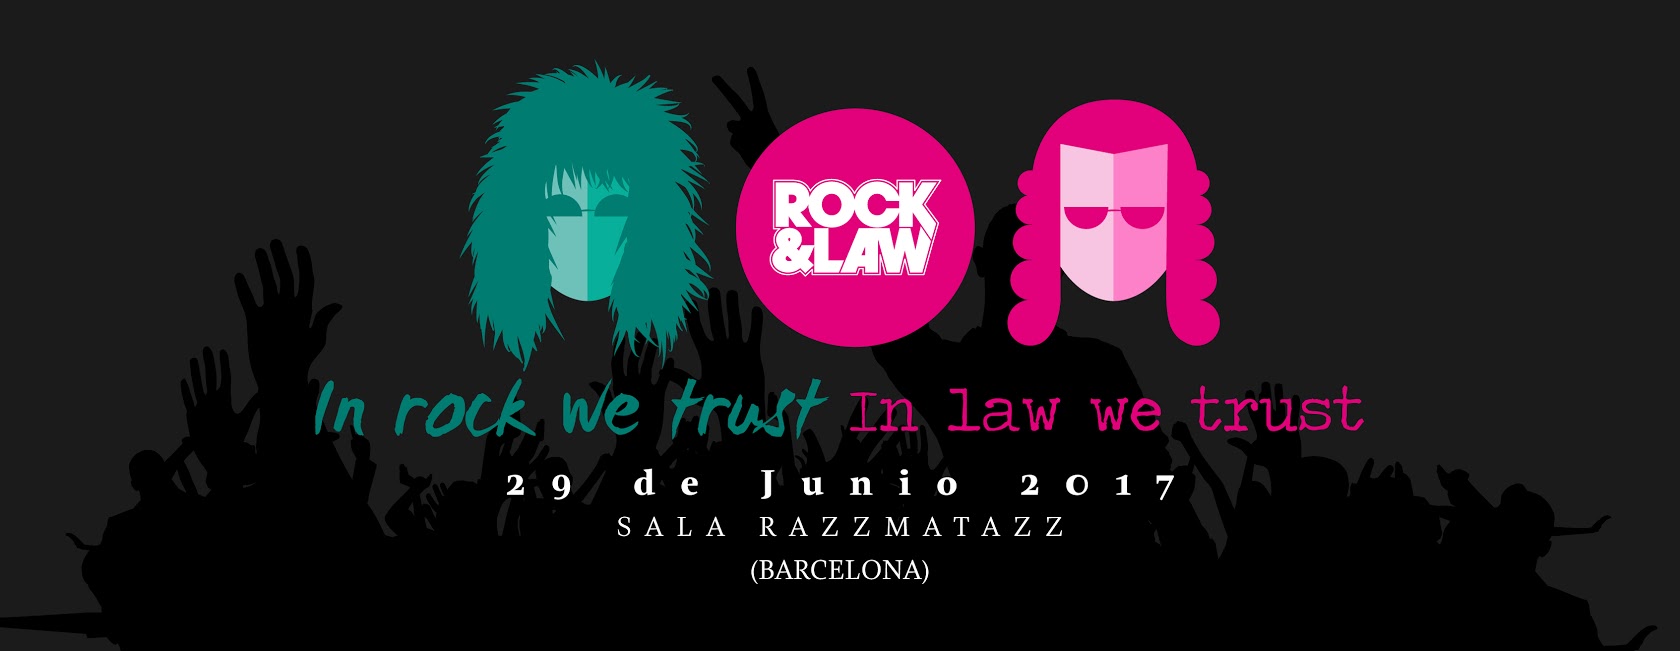 Rock and Law Festival 2017